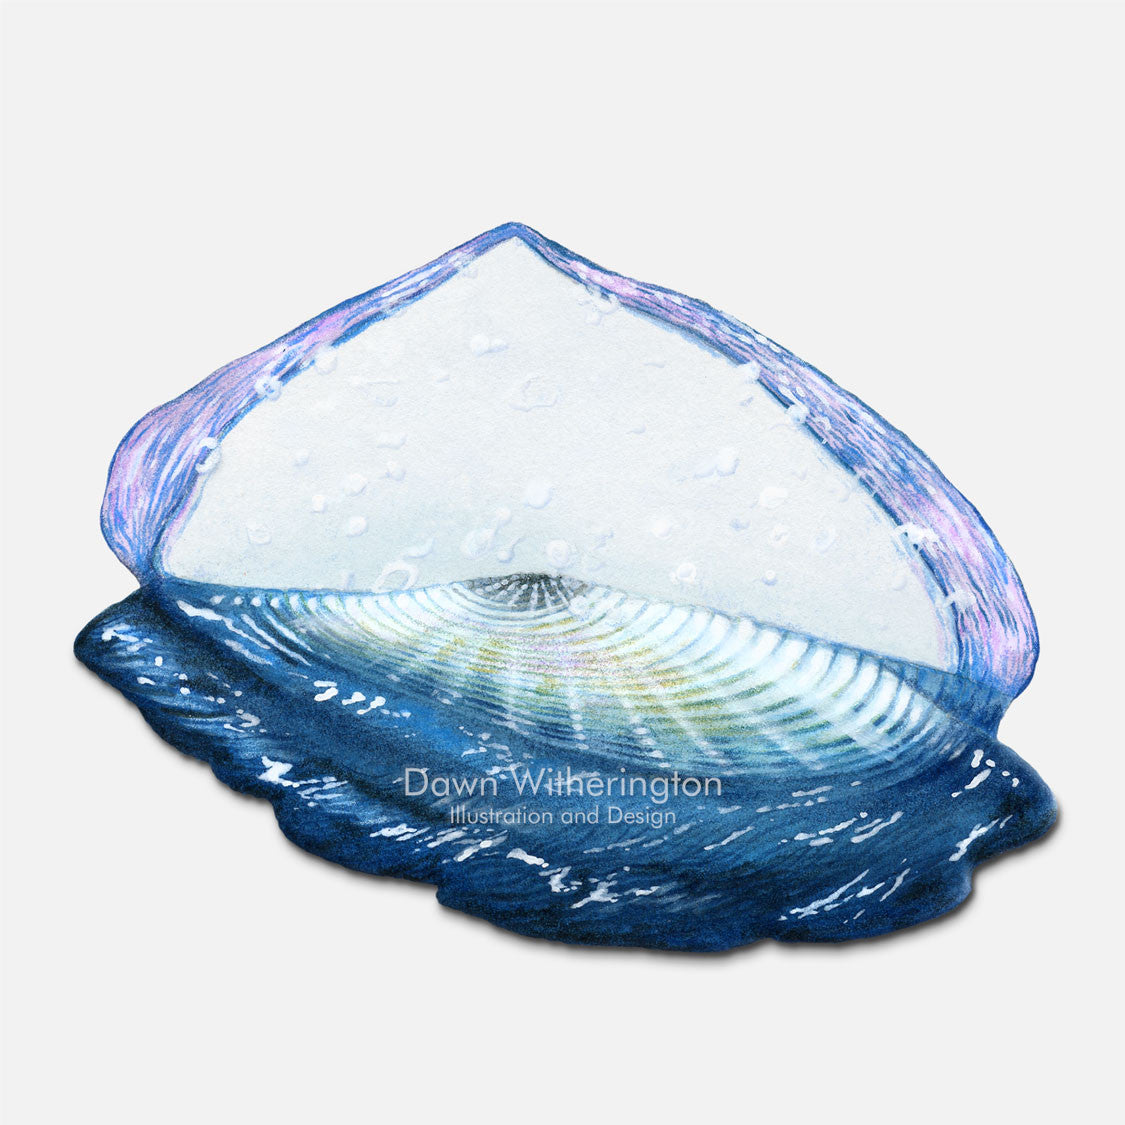 This beautiful illustration of a stranded by-the-wind sailor, Velella velella, is biologically accurate in detail.